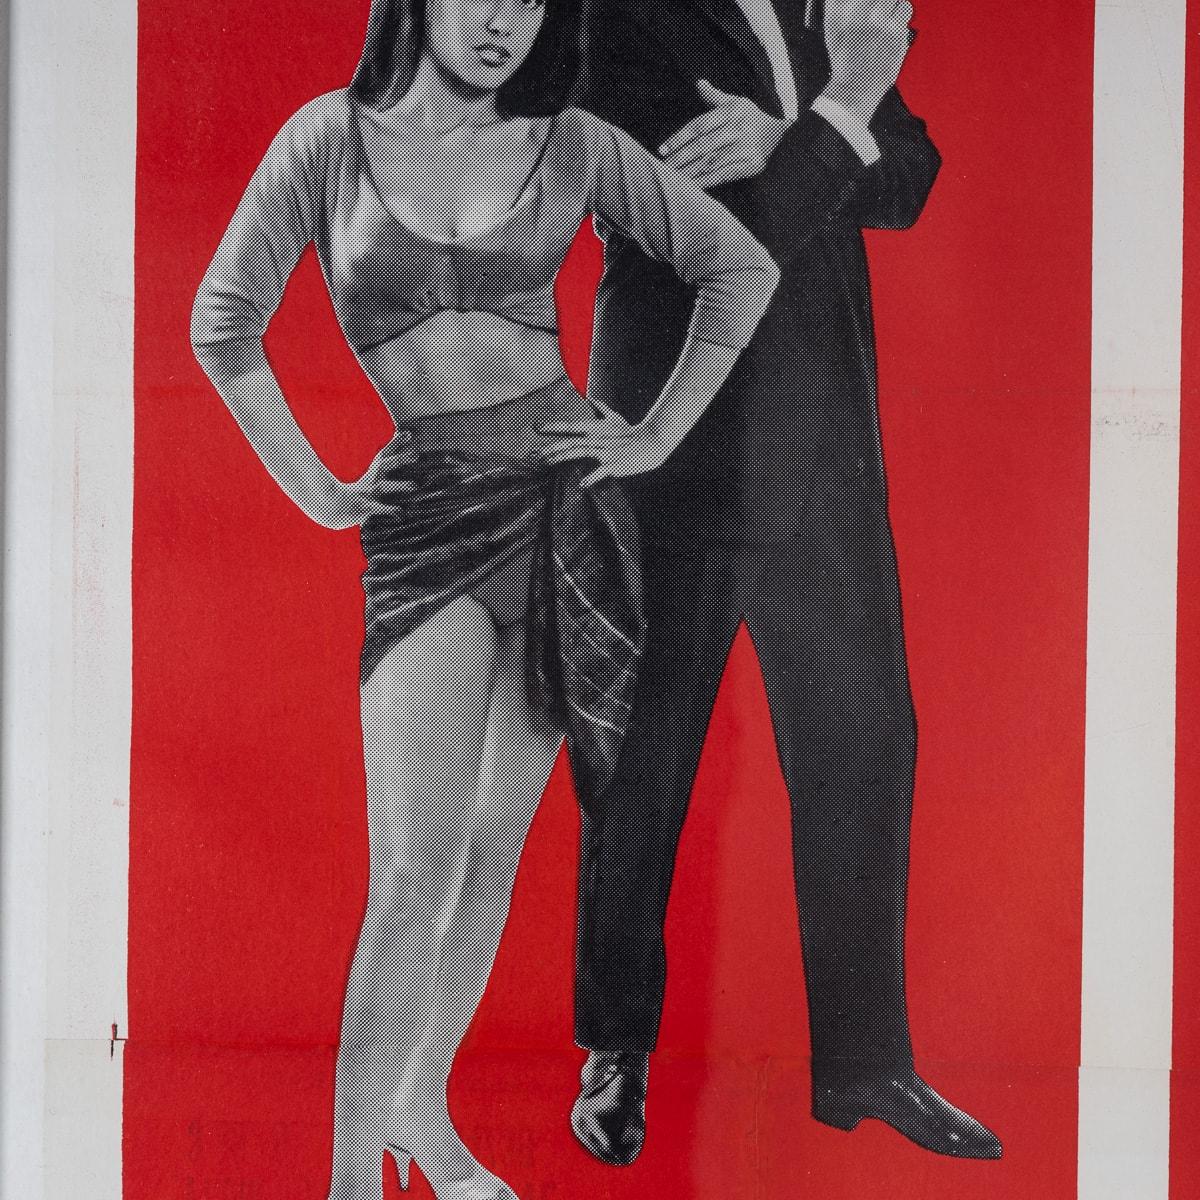 20th Century Original American (U.S) Release James Bond 'From Russia With Love' Poster c.1963 For Sale